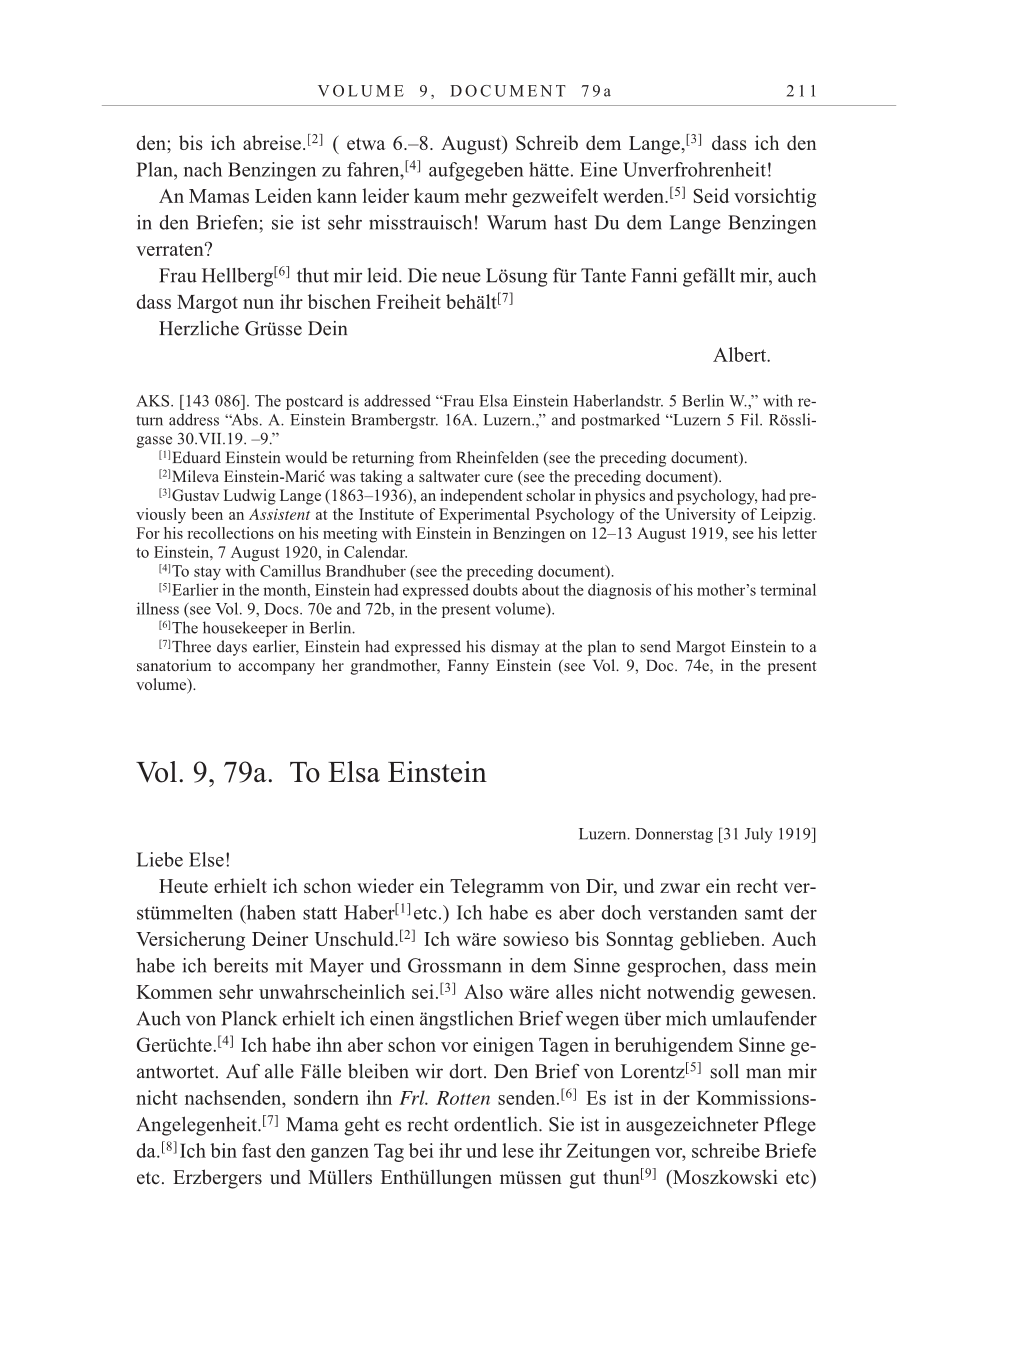 Volume 10: The Berlin Years: Correspondence May-December 1920 / Supplementary Correspondence 1909-1920 page 211